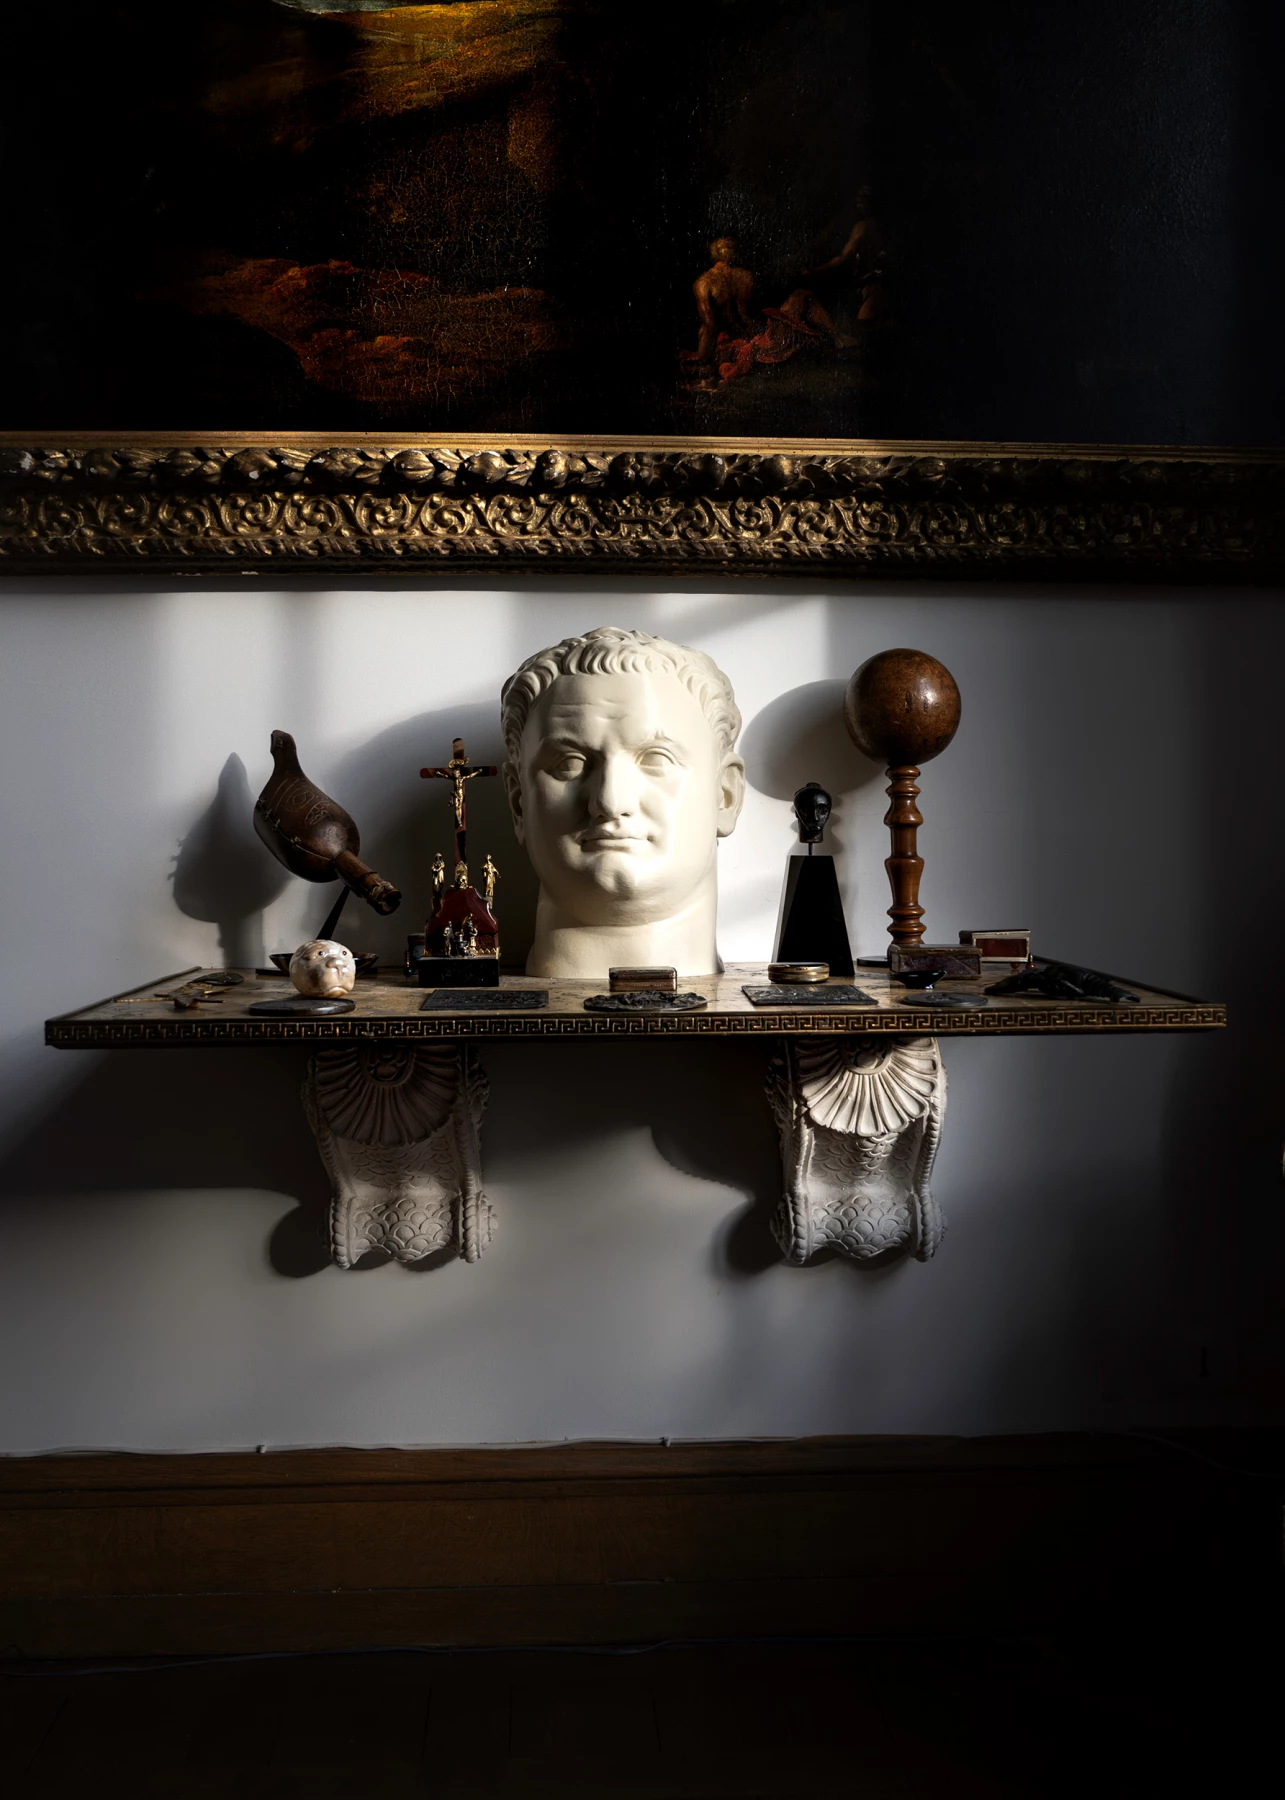 “Emperor Titus” by Unidentified Sculptors  from the Imperial Portraits of Pantelleria collection